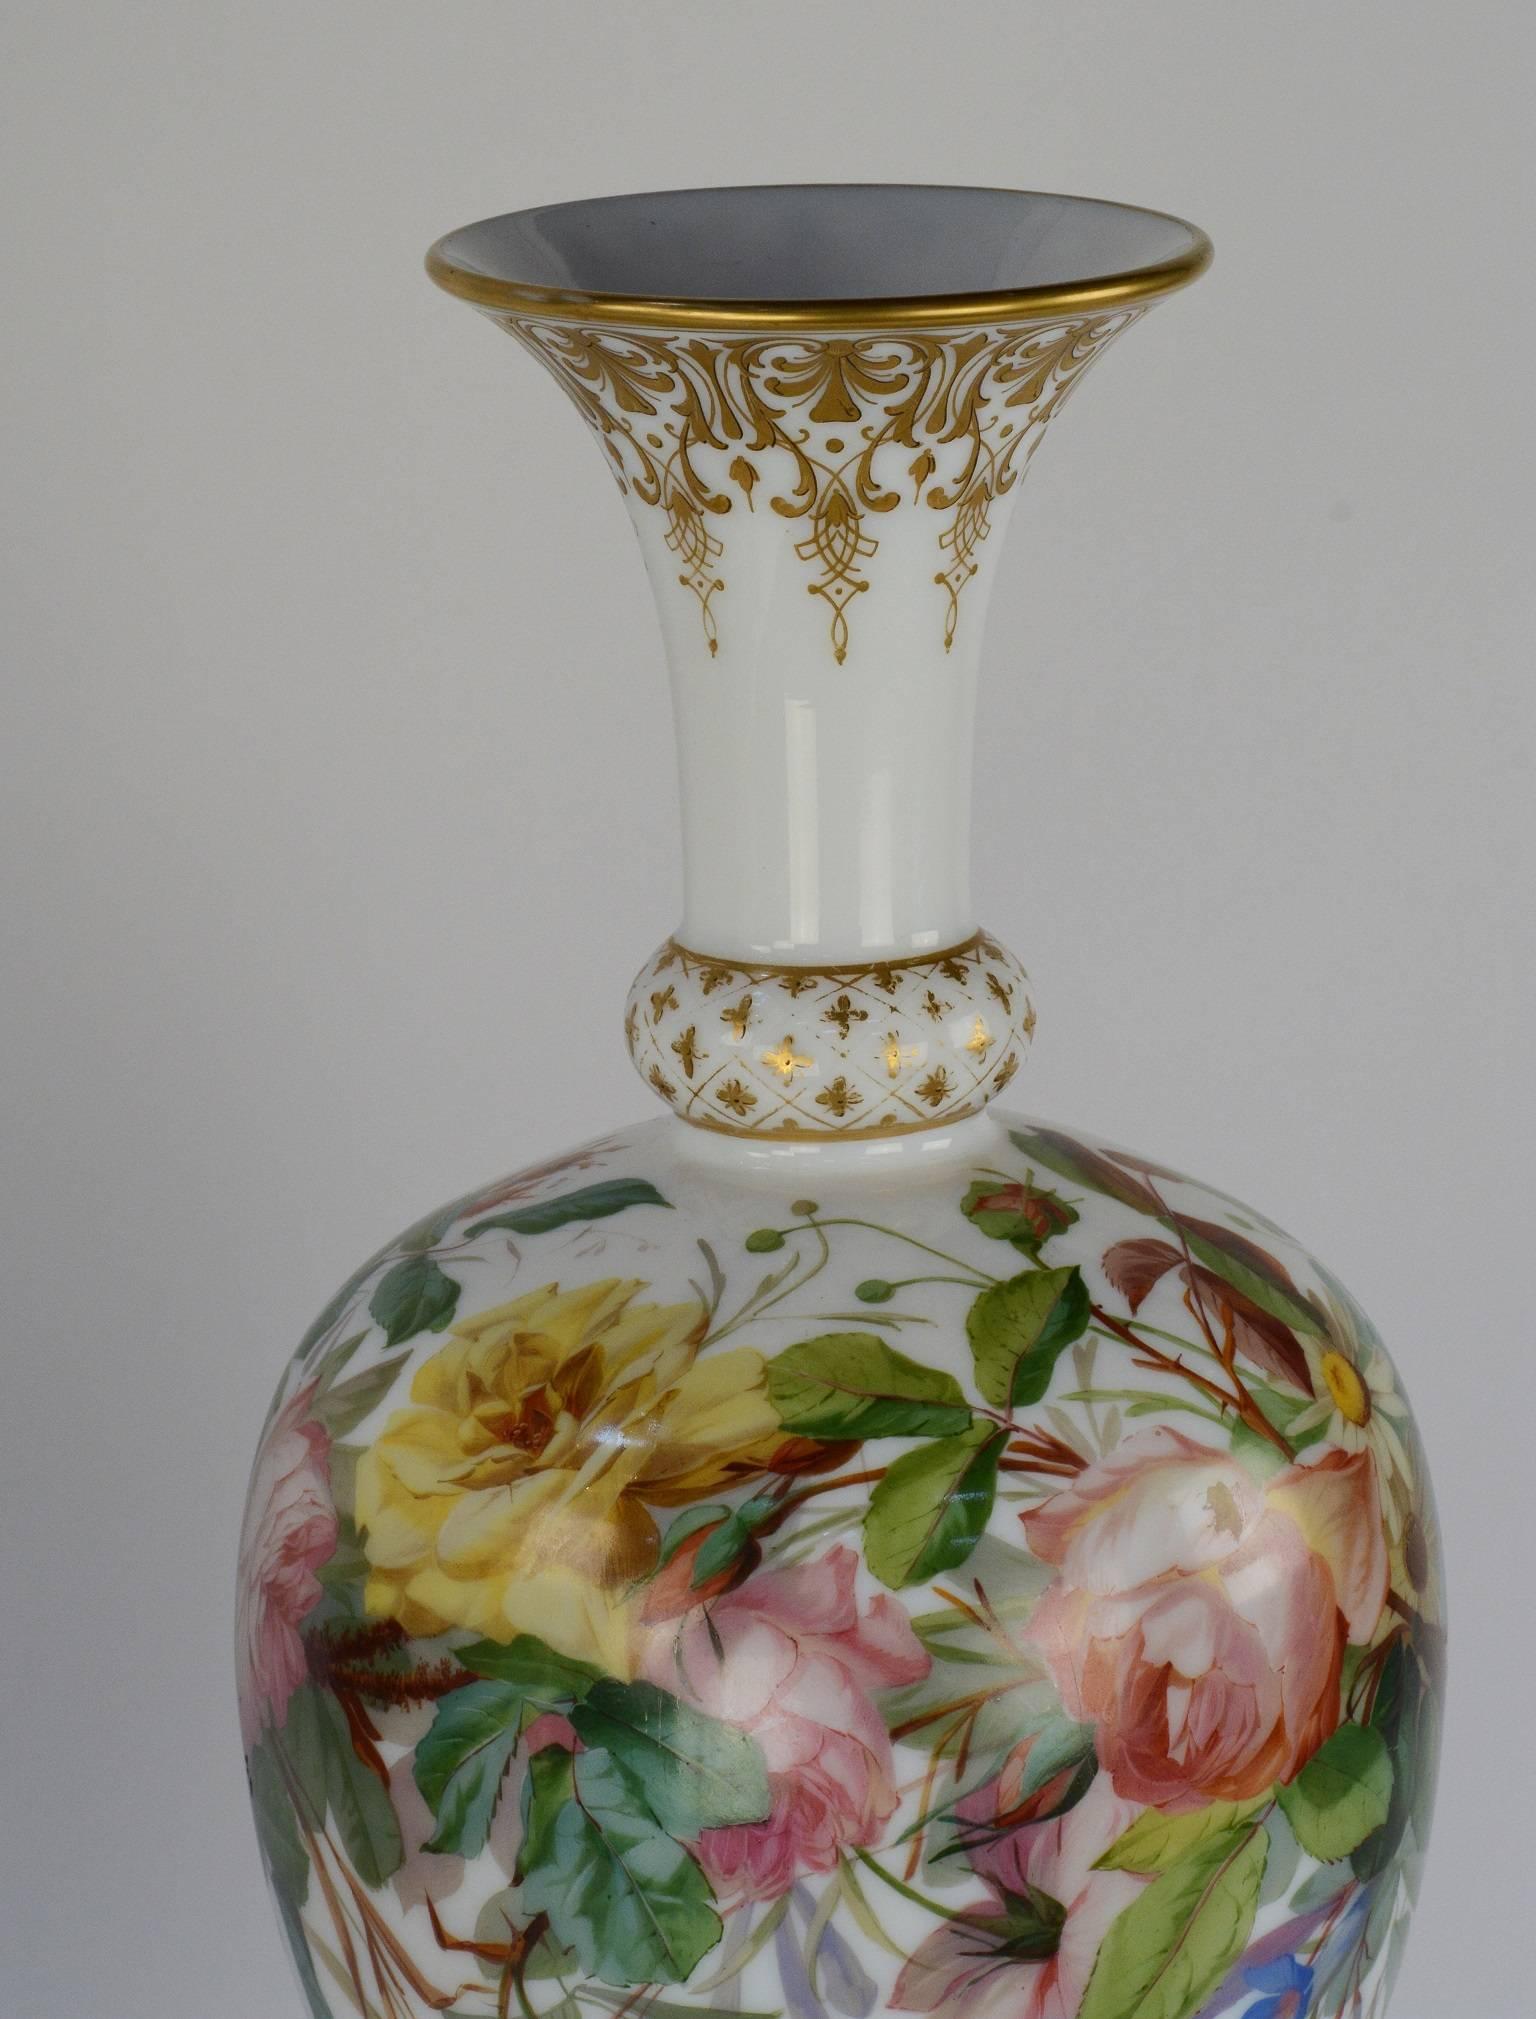 Pair of opaline Baccarat floral vases, turn of the century.